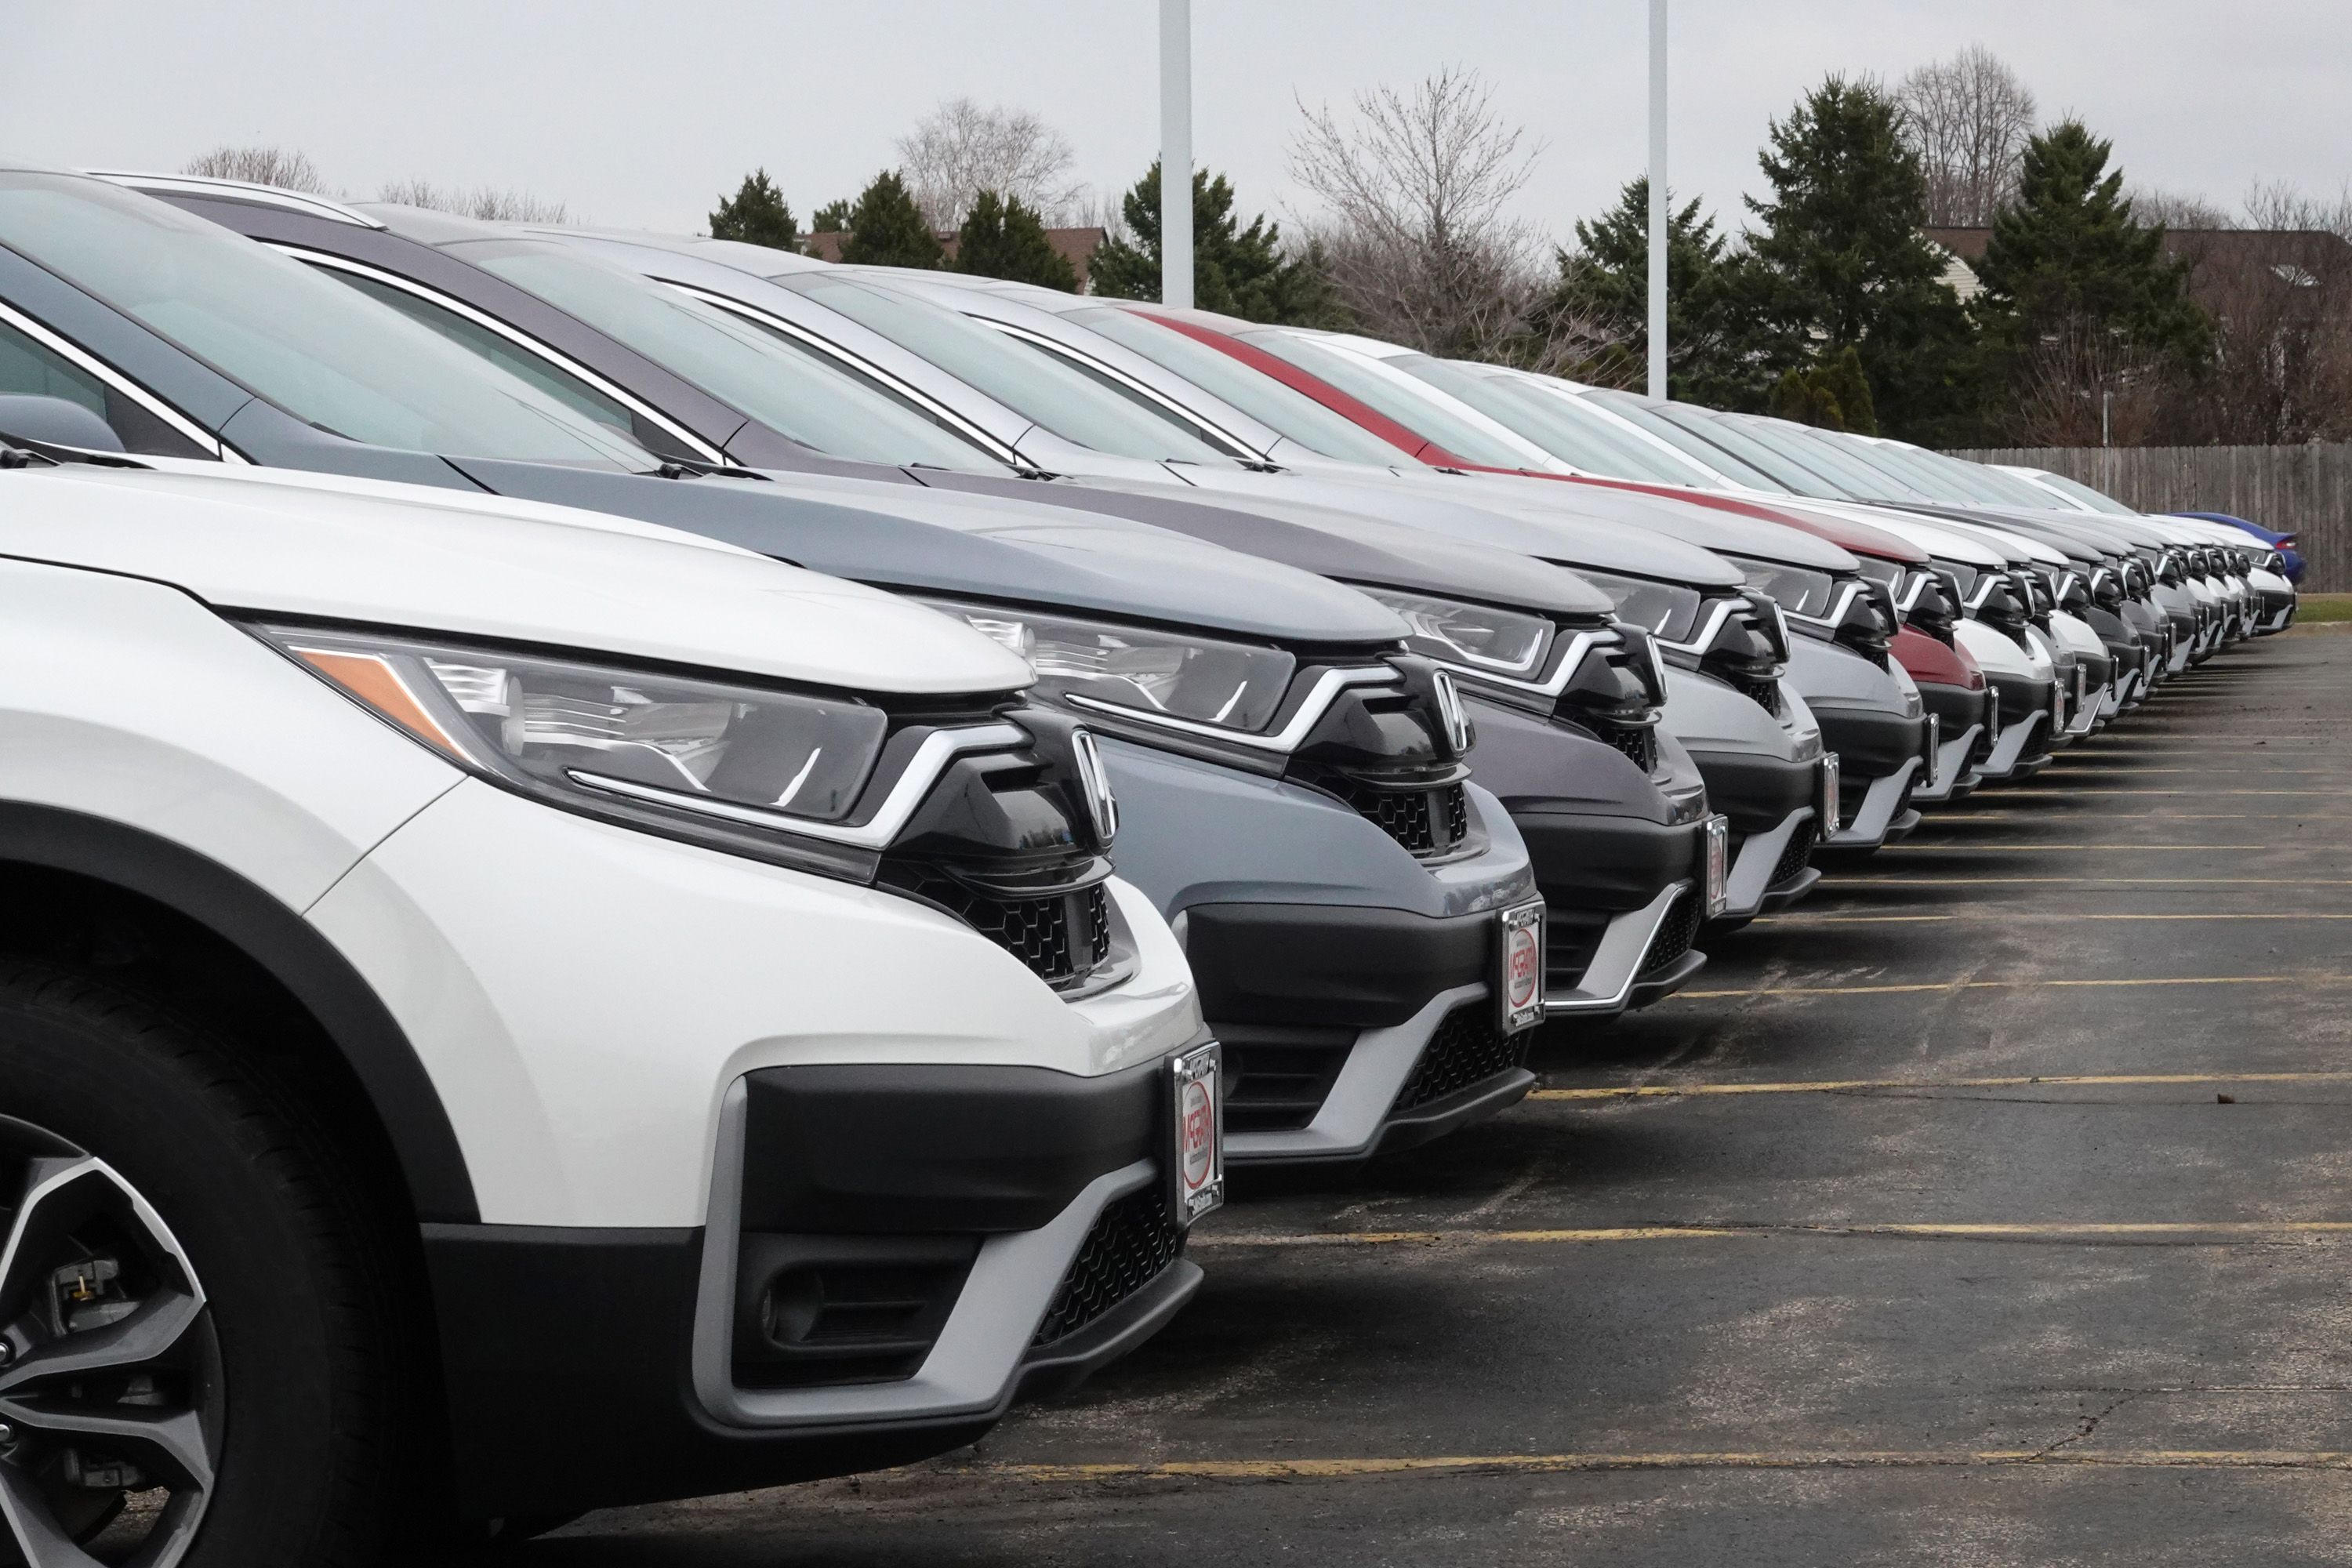 New Car Prices Are Skyrocketing This Spring